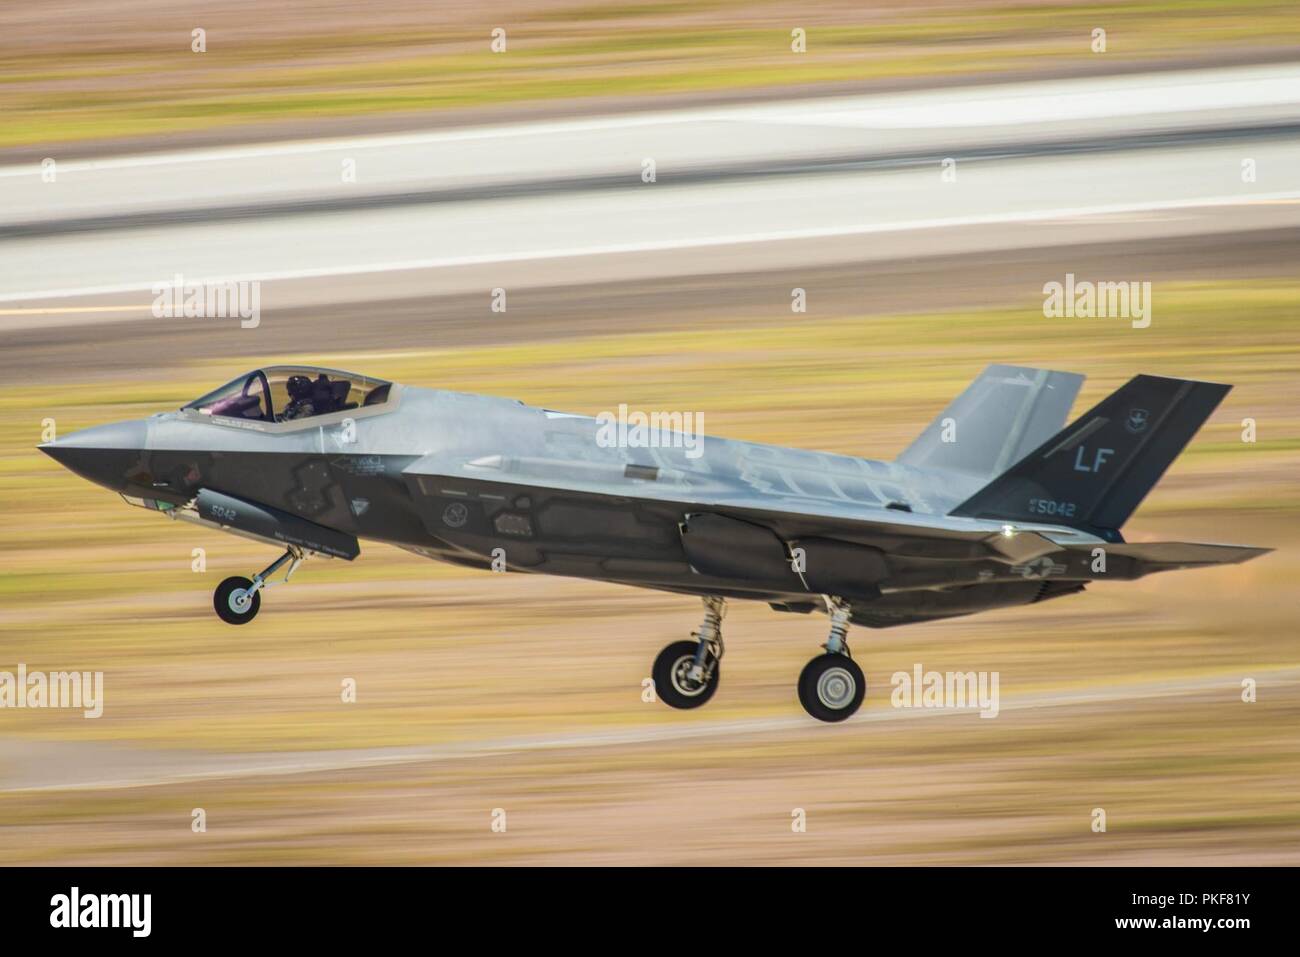 An F-35A Lightning II pilot, assigned to the 56th Fighter Wing, retracts the landing gear after takeoff at Luke Air Force Base, Ariz., Aug. 3, 2018. Currently 72 F-35’s are assigned to Luke AFB flying more than 20,000 hours since first arriving in 2014. Stock Photo